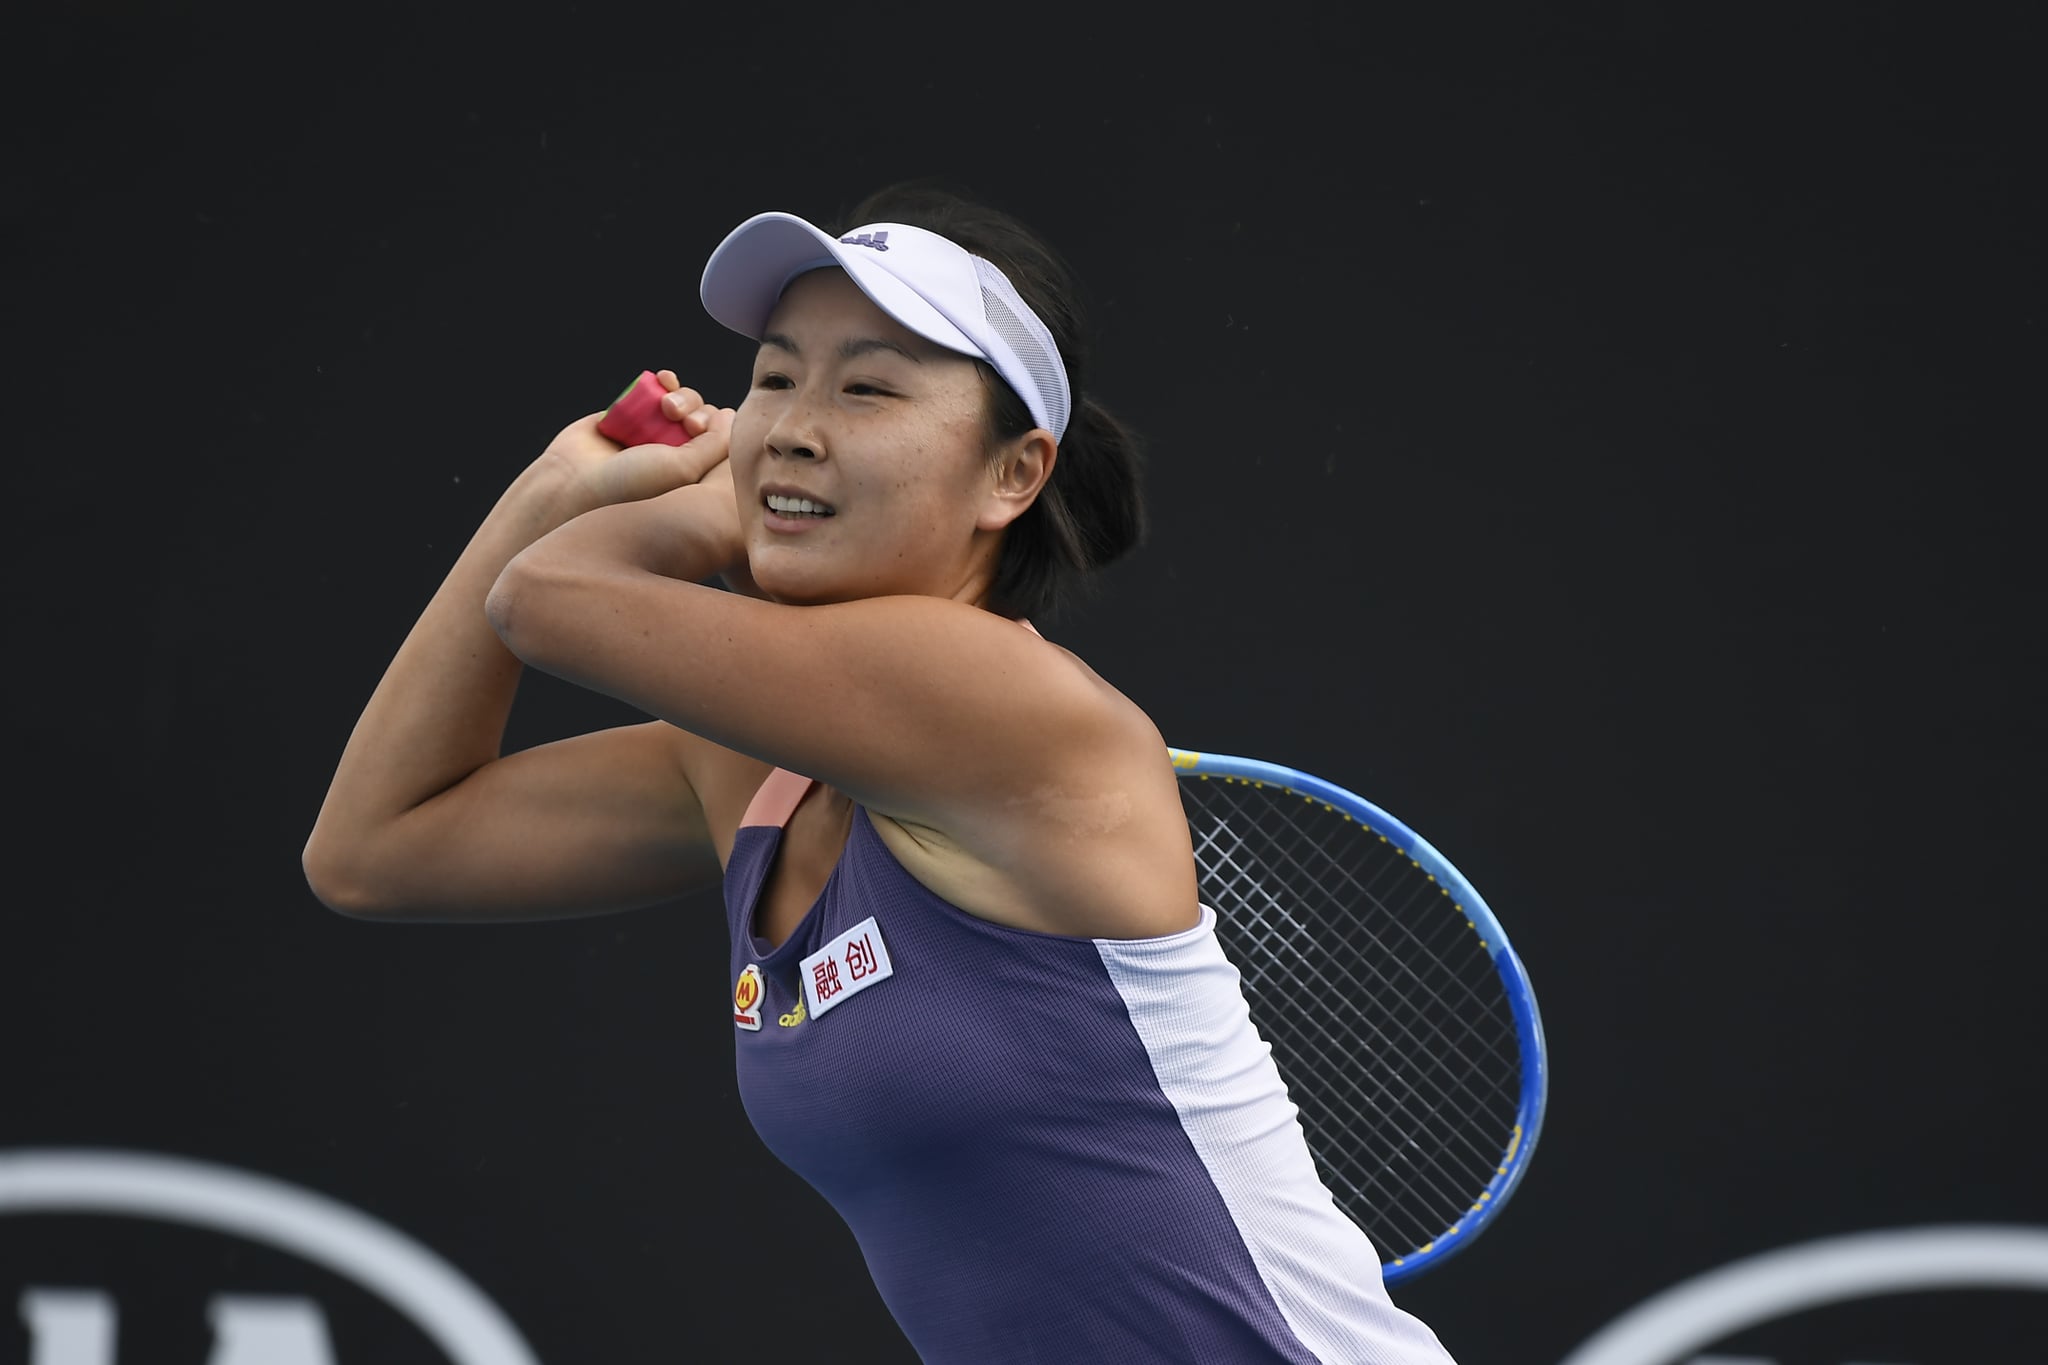 Chinese tennis player Peng Shuai competes in the 2020 Australian Open.